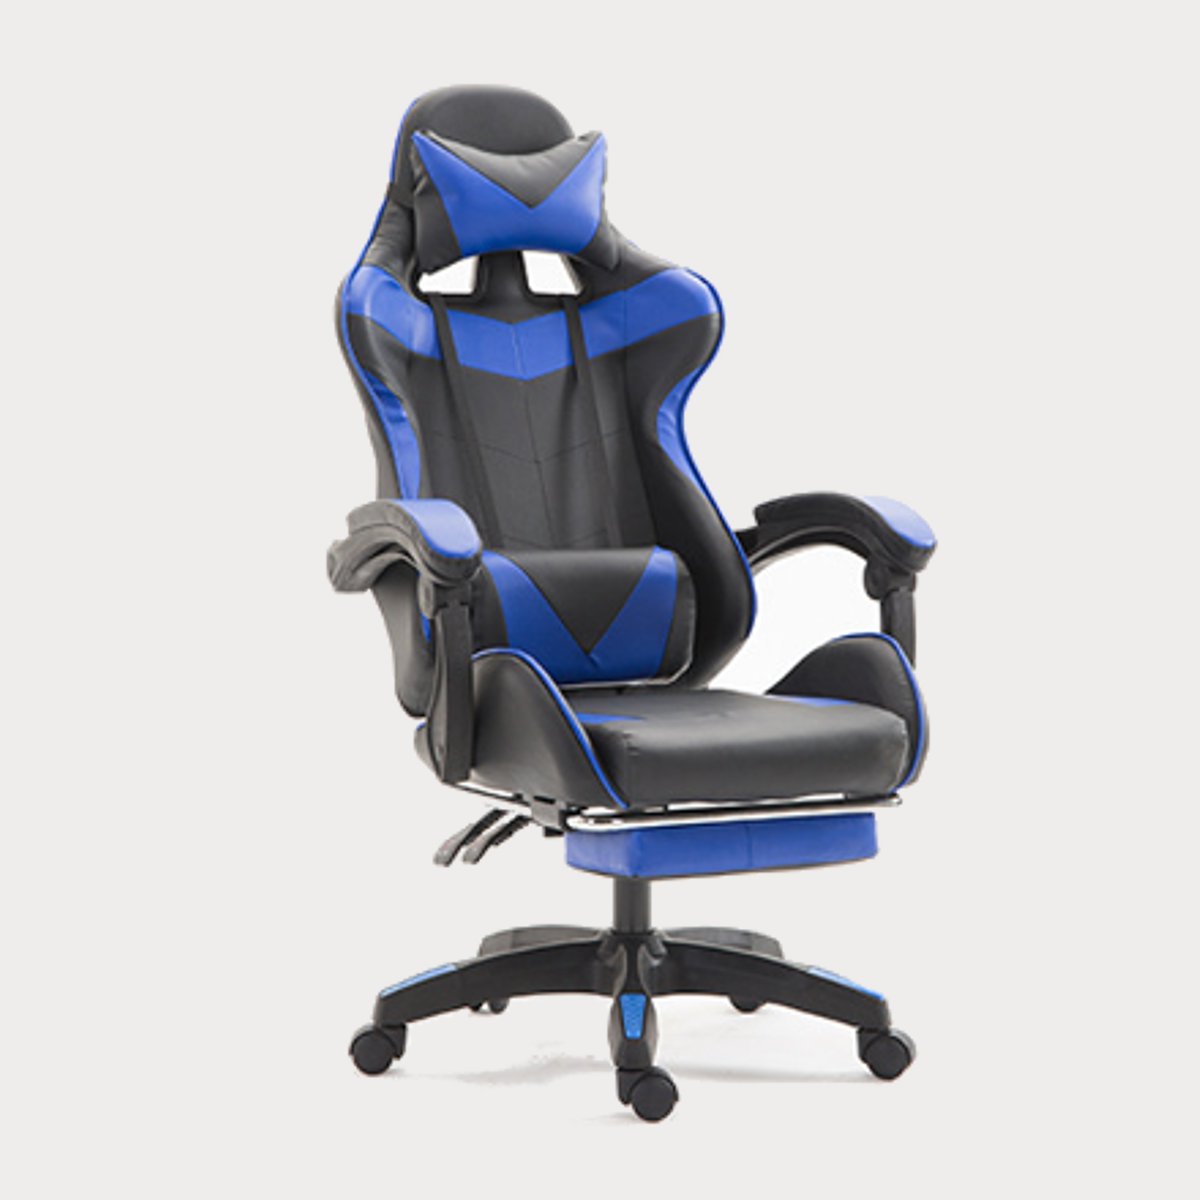 Ergonomic High Back Racing Style Reclining Office Chair Adjustable Rotating Lift Chair PU Leather Gaming Chair Laptop Desk Chair with Footrest